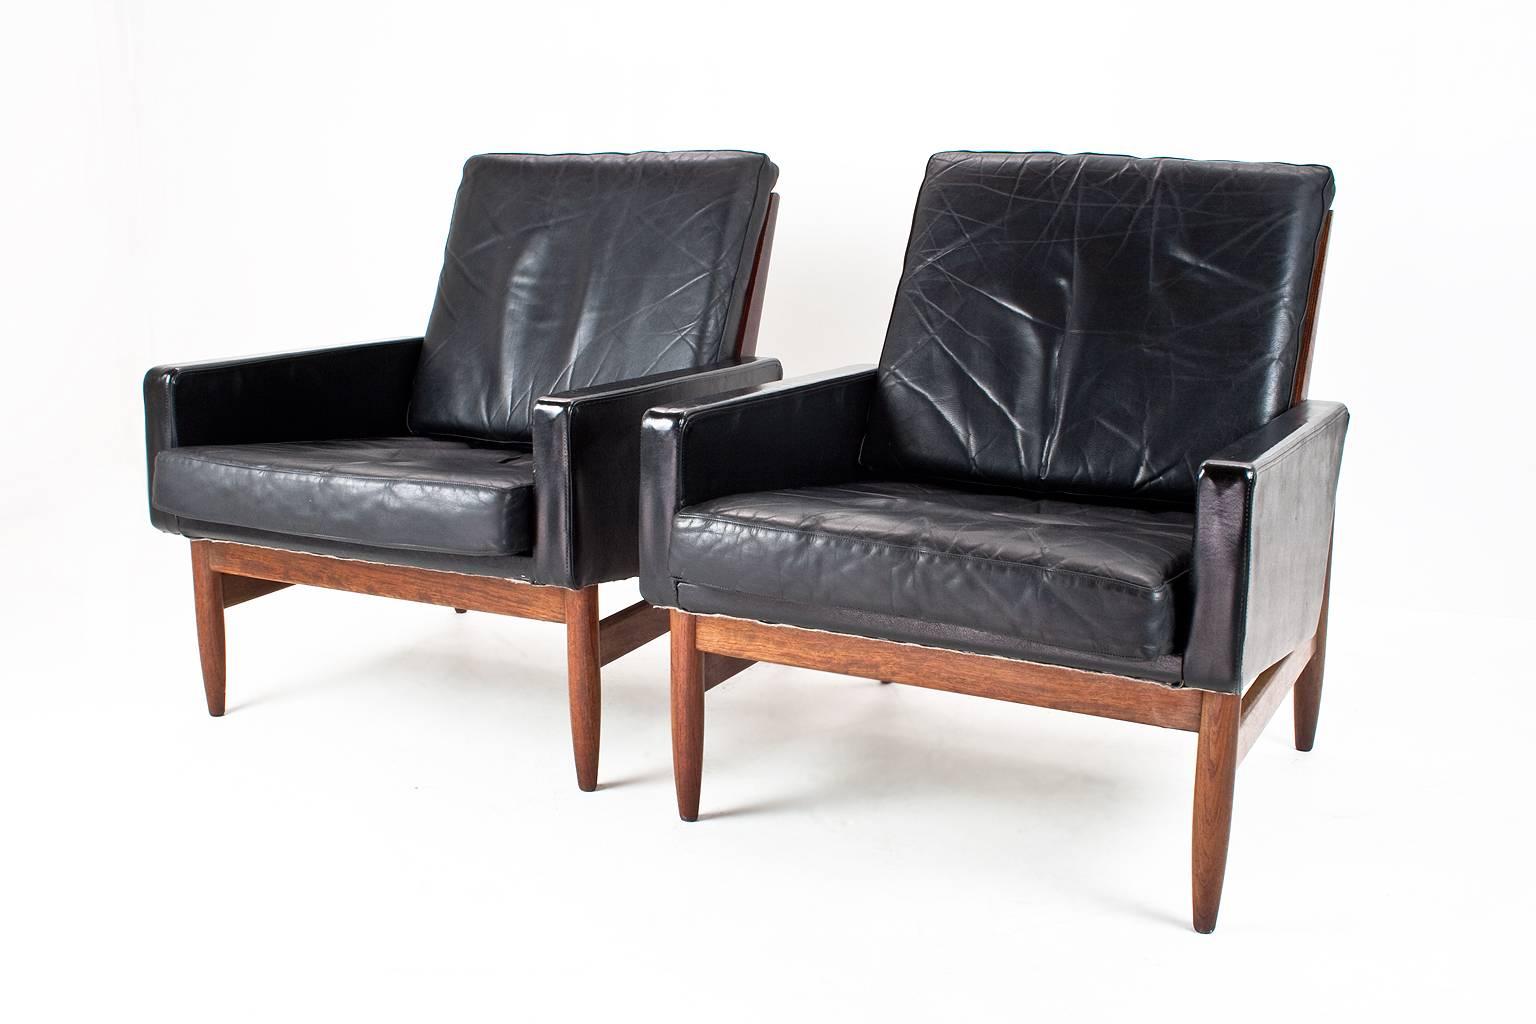 Pair of Scandinavian Mid-Century lounge chairs on a teak frame with rosewood shell and black leather upholstery in original yet very good condition. The seat cushions have been filled with new foam. 

These chairs are a great example of the